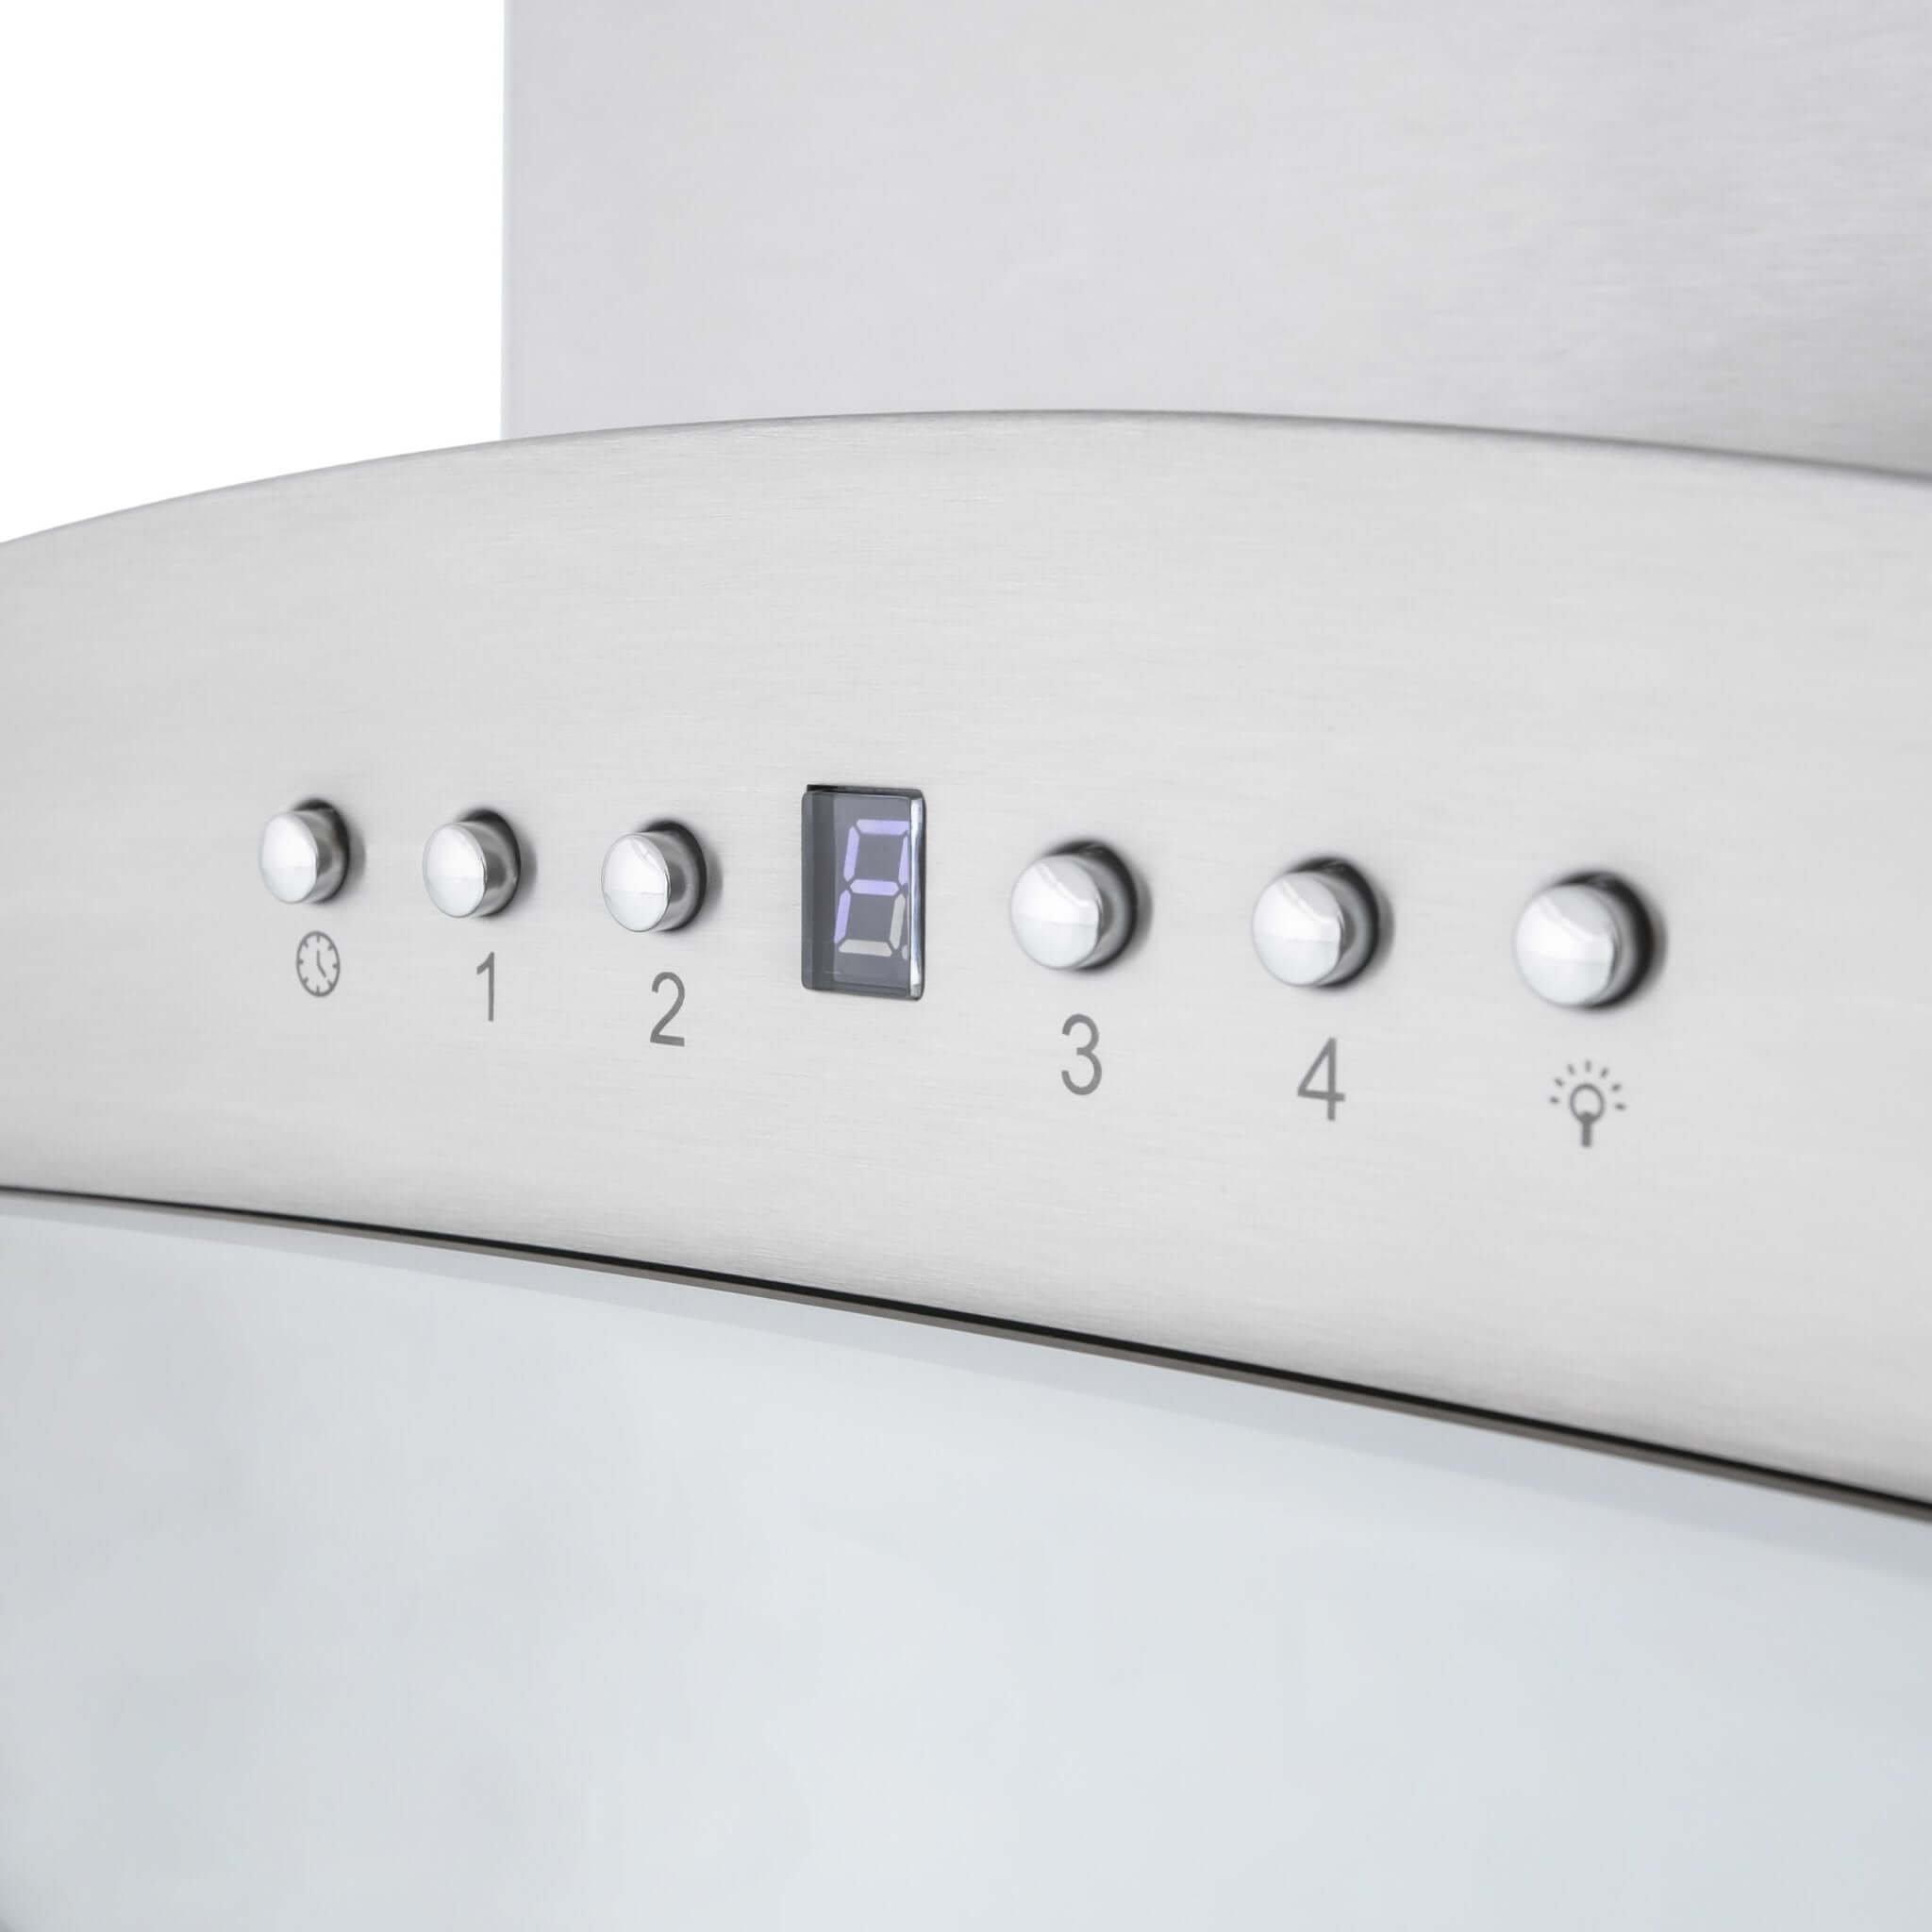 Button panel and display on ZLINE Convertible Vent Wall Mount Range Hood in Stainless Steel & Glass (KN).